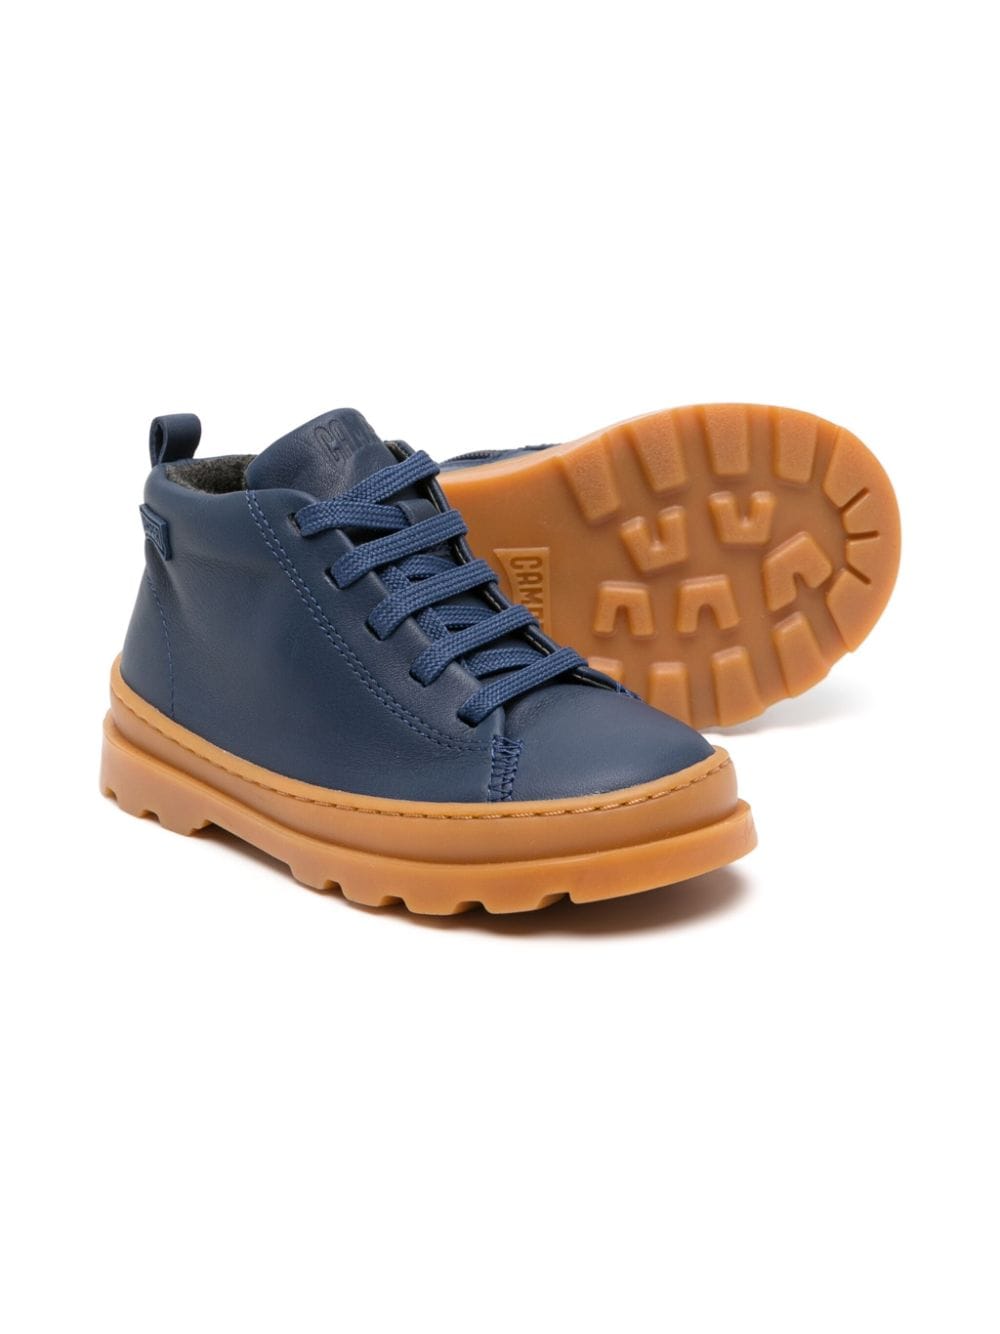 Image 2 of Camper Kids Brutus leather ankle boots